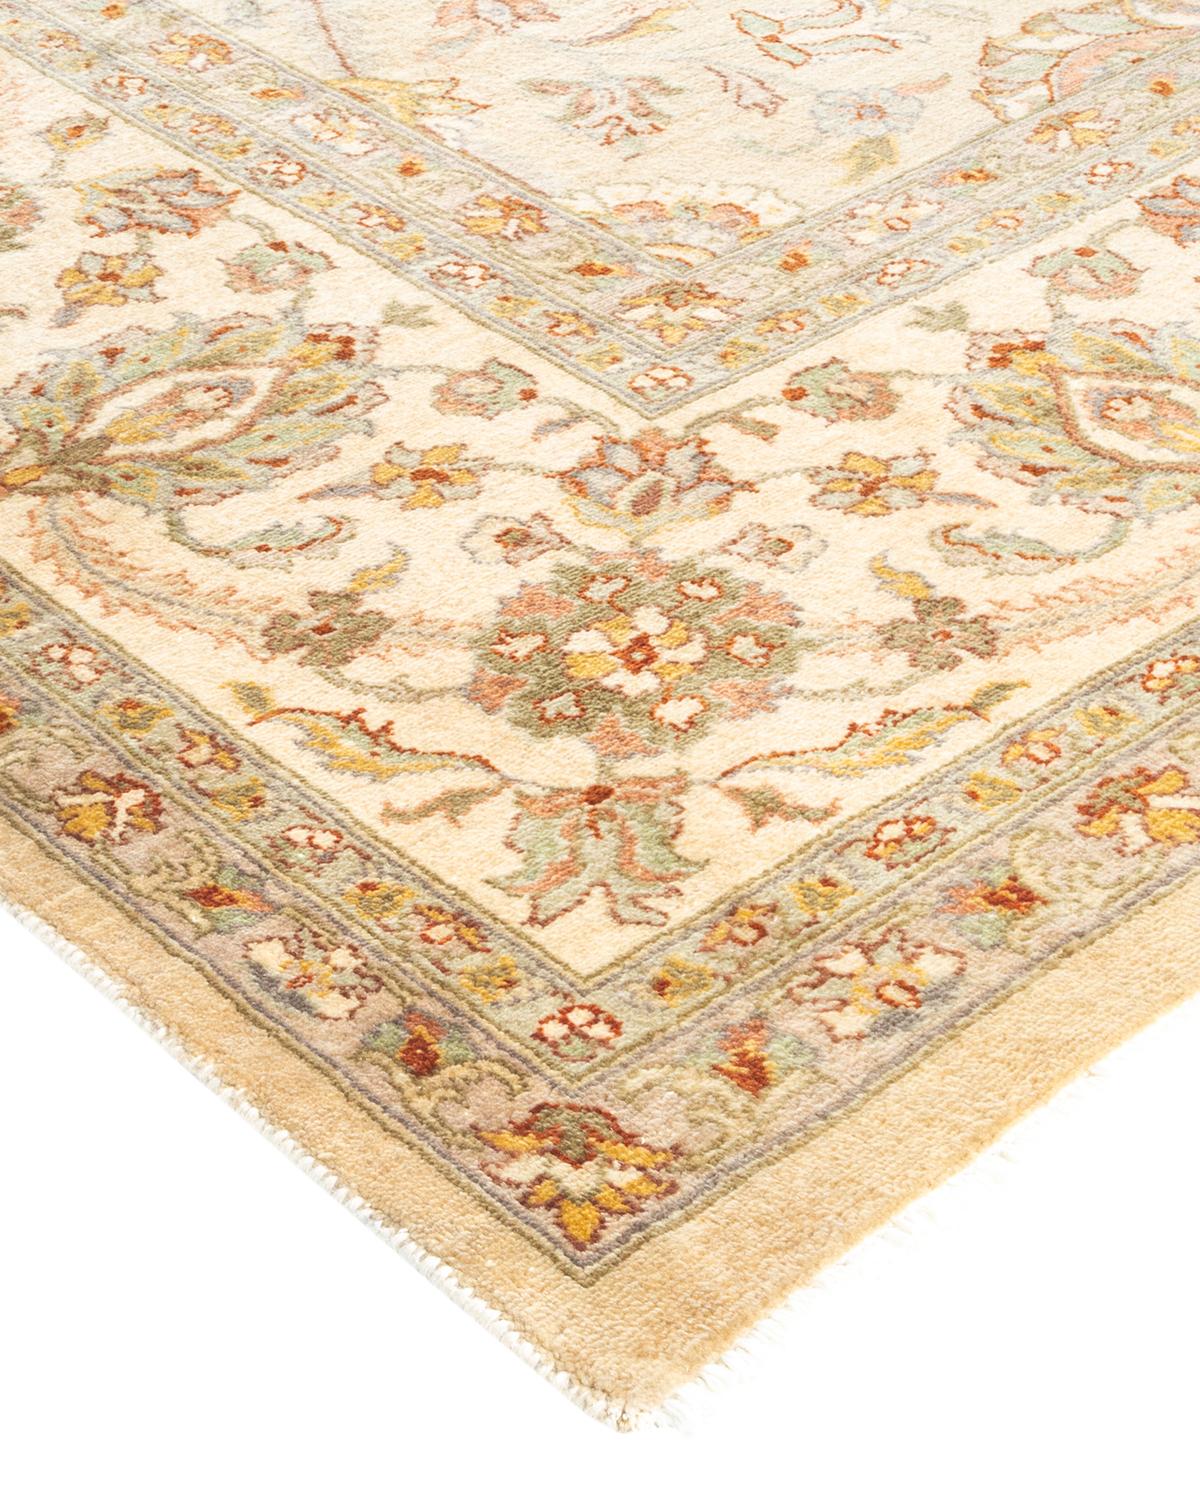 Originating centuries ago in what is now Turkey, Oushak rugs have long been sought after for their intricate patterns, lush yet subtle colors, and soft luster. These rugs continue that tradition. Hand-knotted of wool by skilled artisans, they will